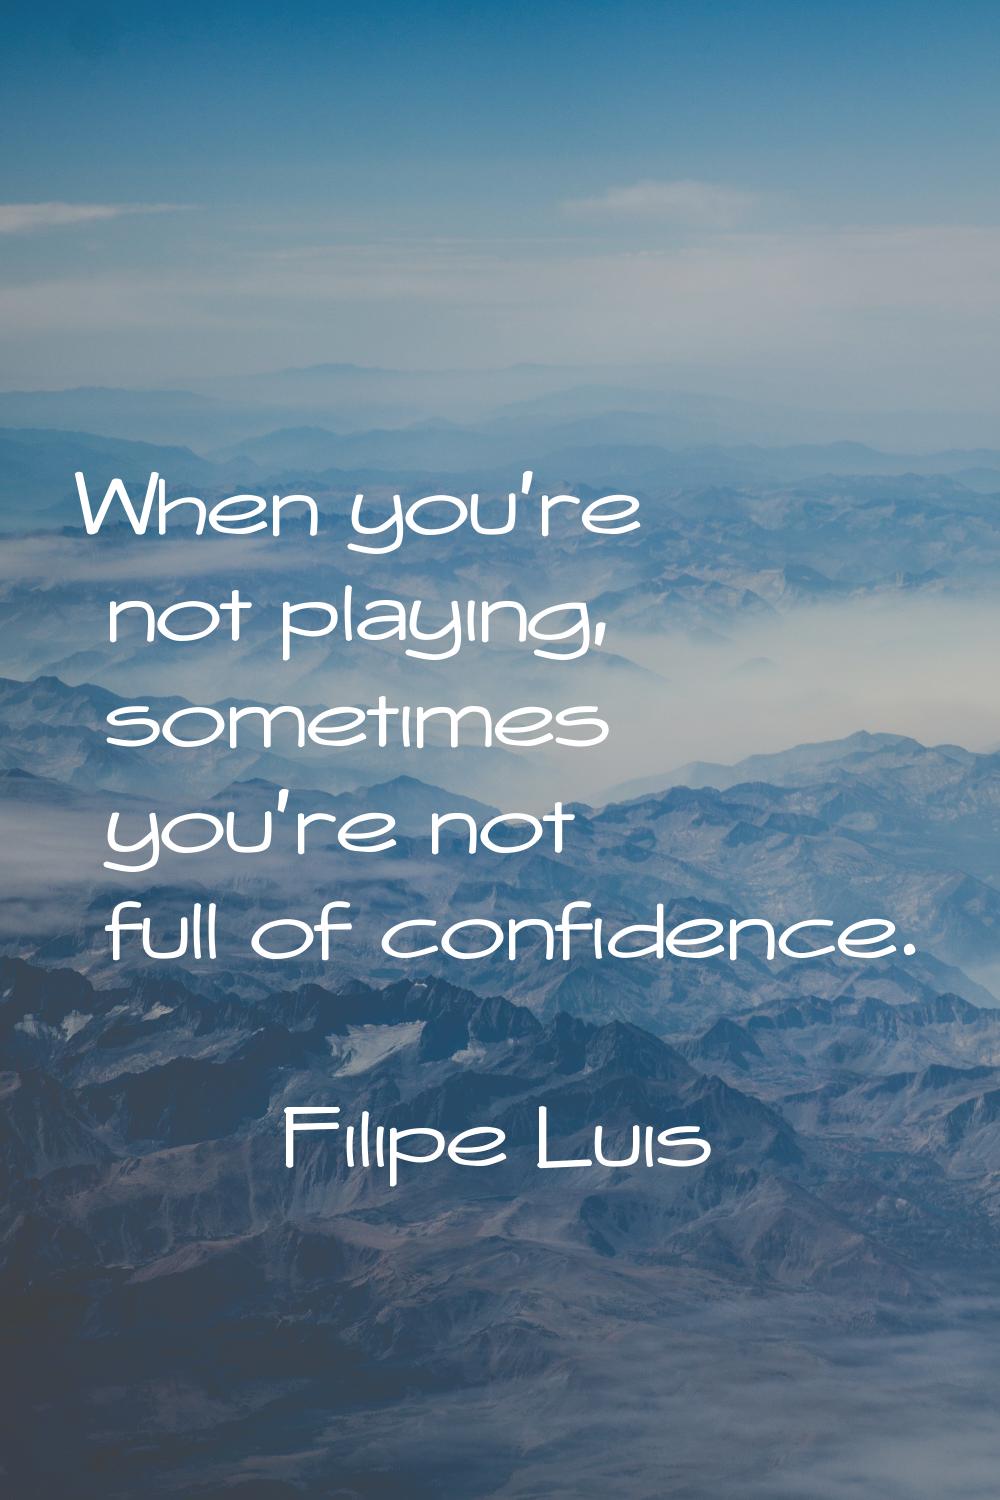 When you're not playing, sometimes you're not full of confidence.